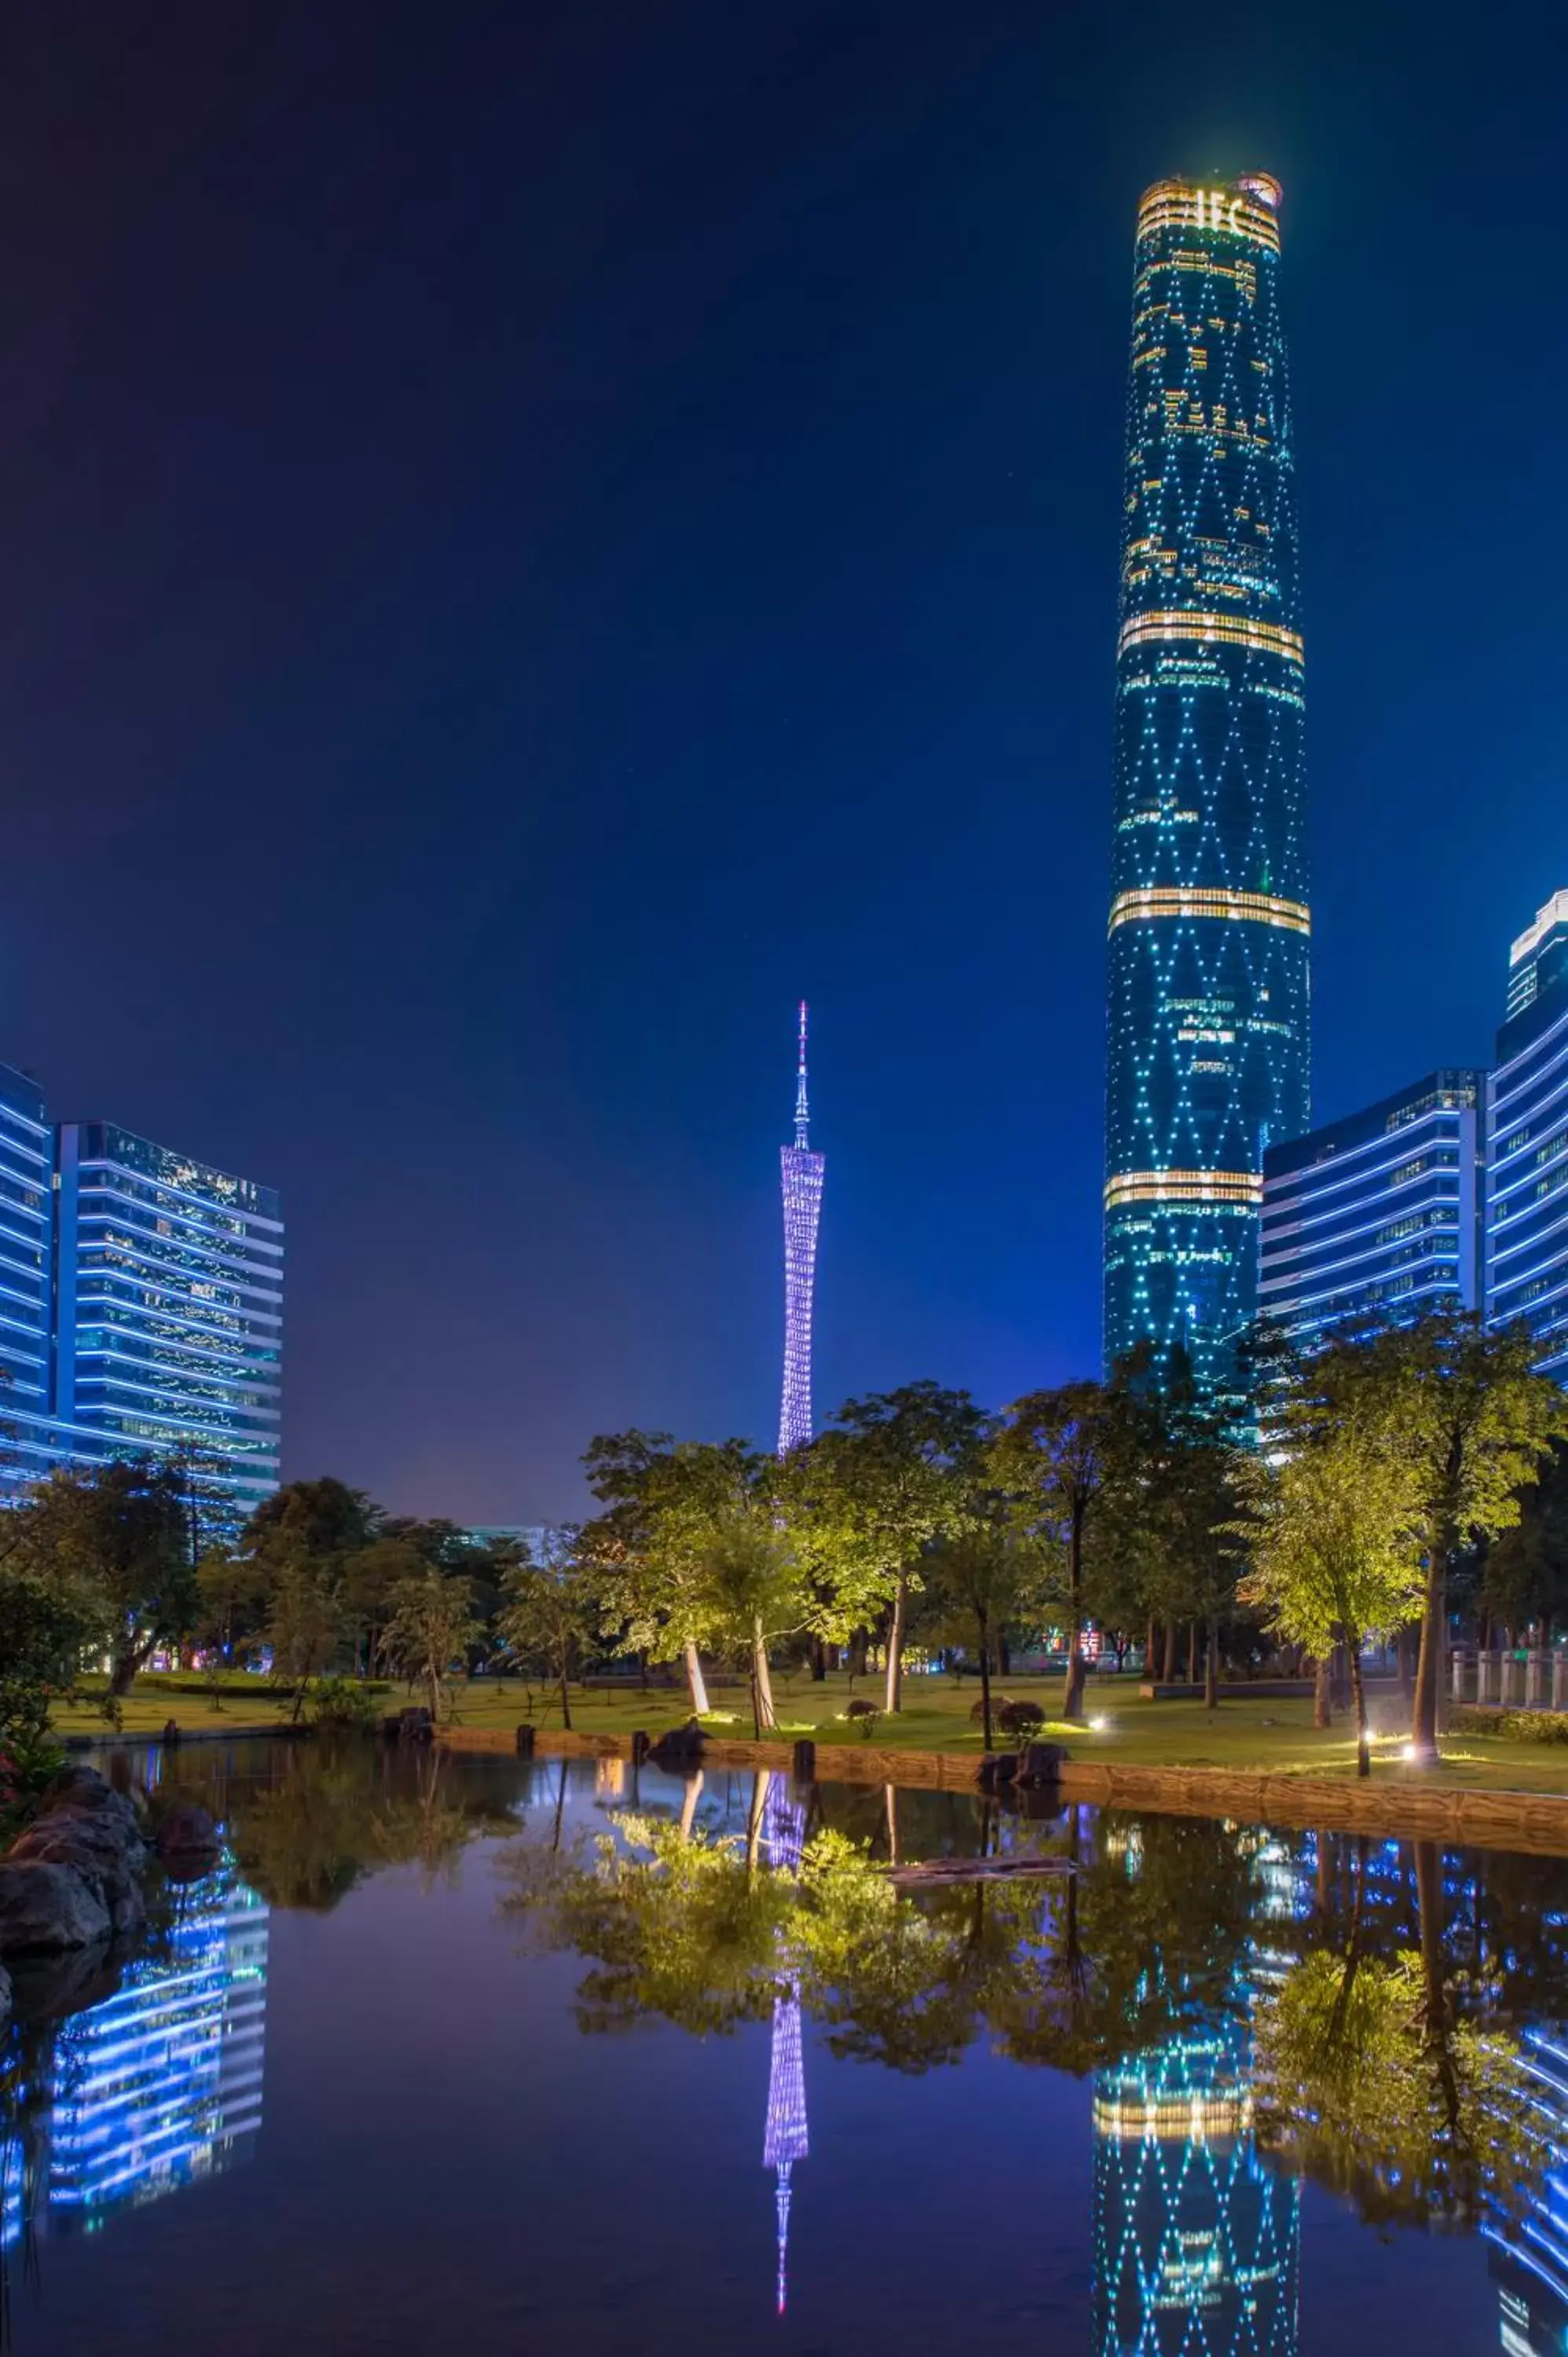 Property building in Four Seasons Hotel Guangzhou - Free Shuttle Bus to Canton Fair Complex during Canton Fair period